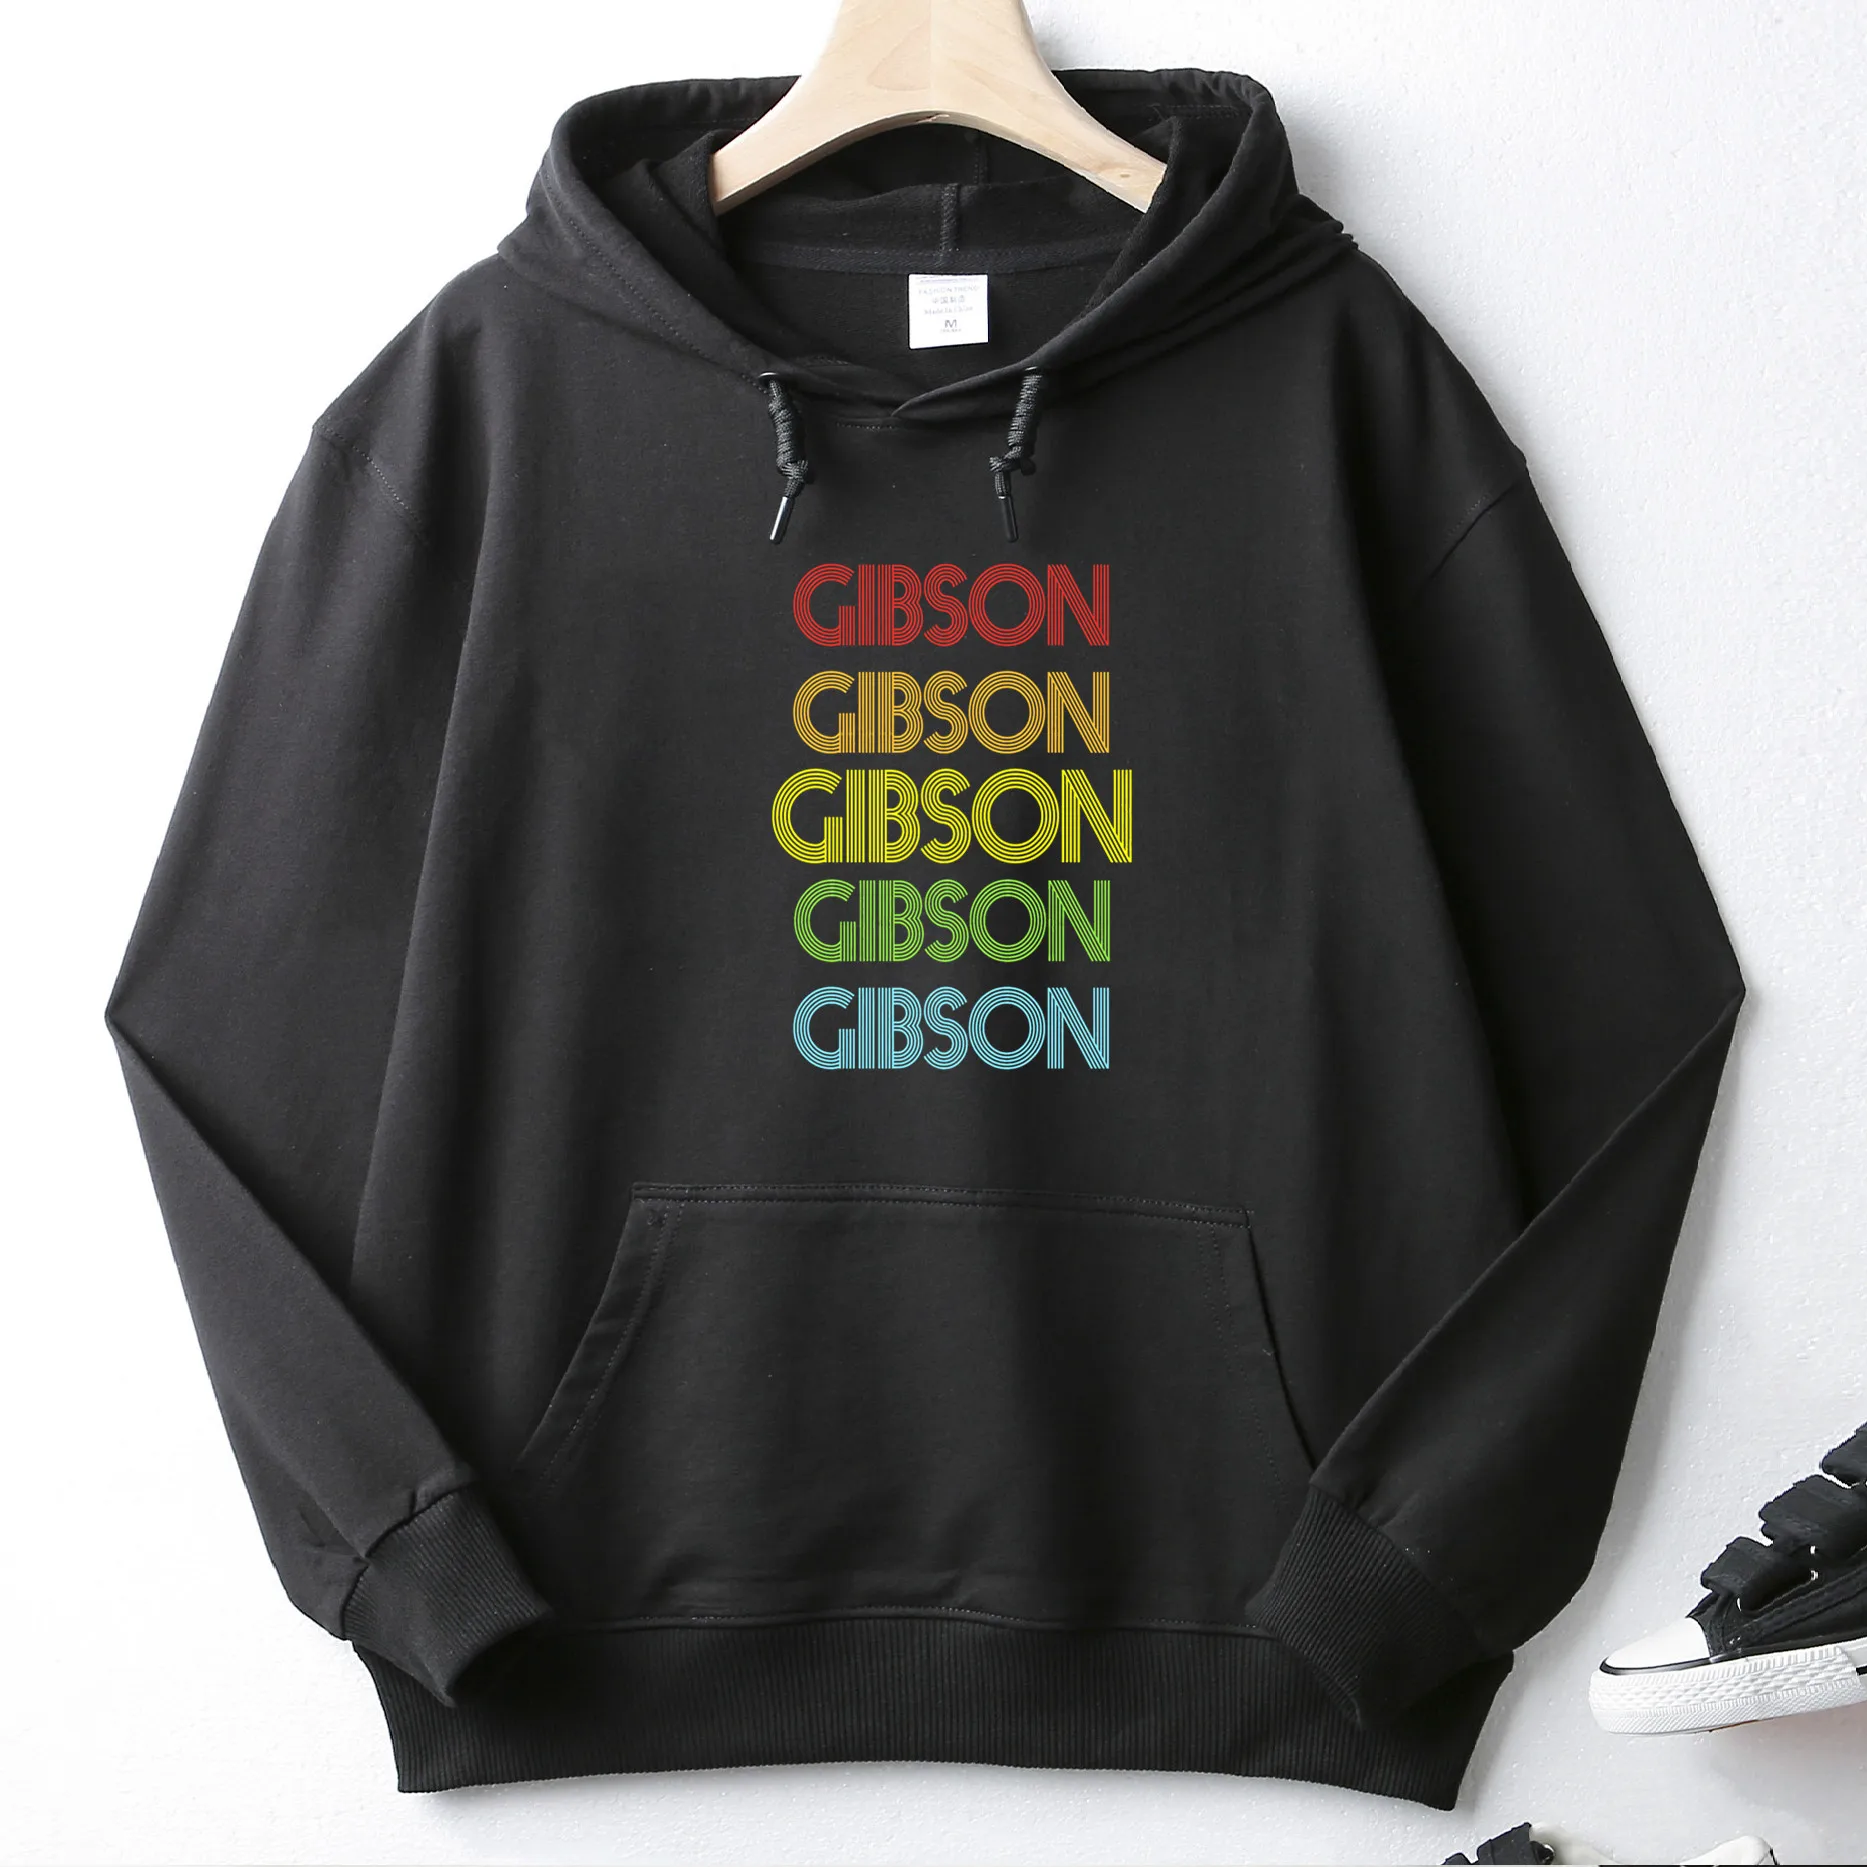 

Gibson Five Kinds Of Colour Logo High Quality Printed Hoodie 100% Cotton Pocket Sweatshirt Unique Unisex Top Asian Size